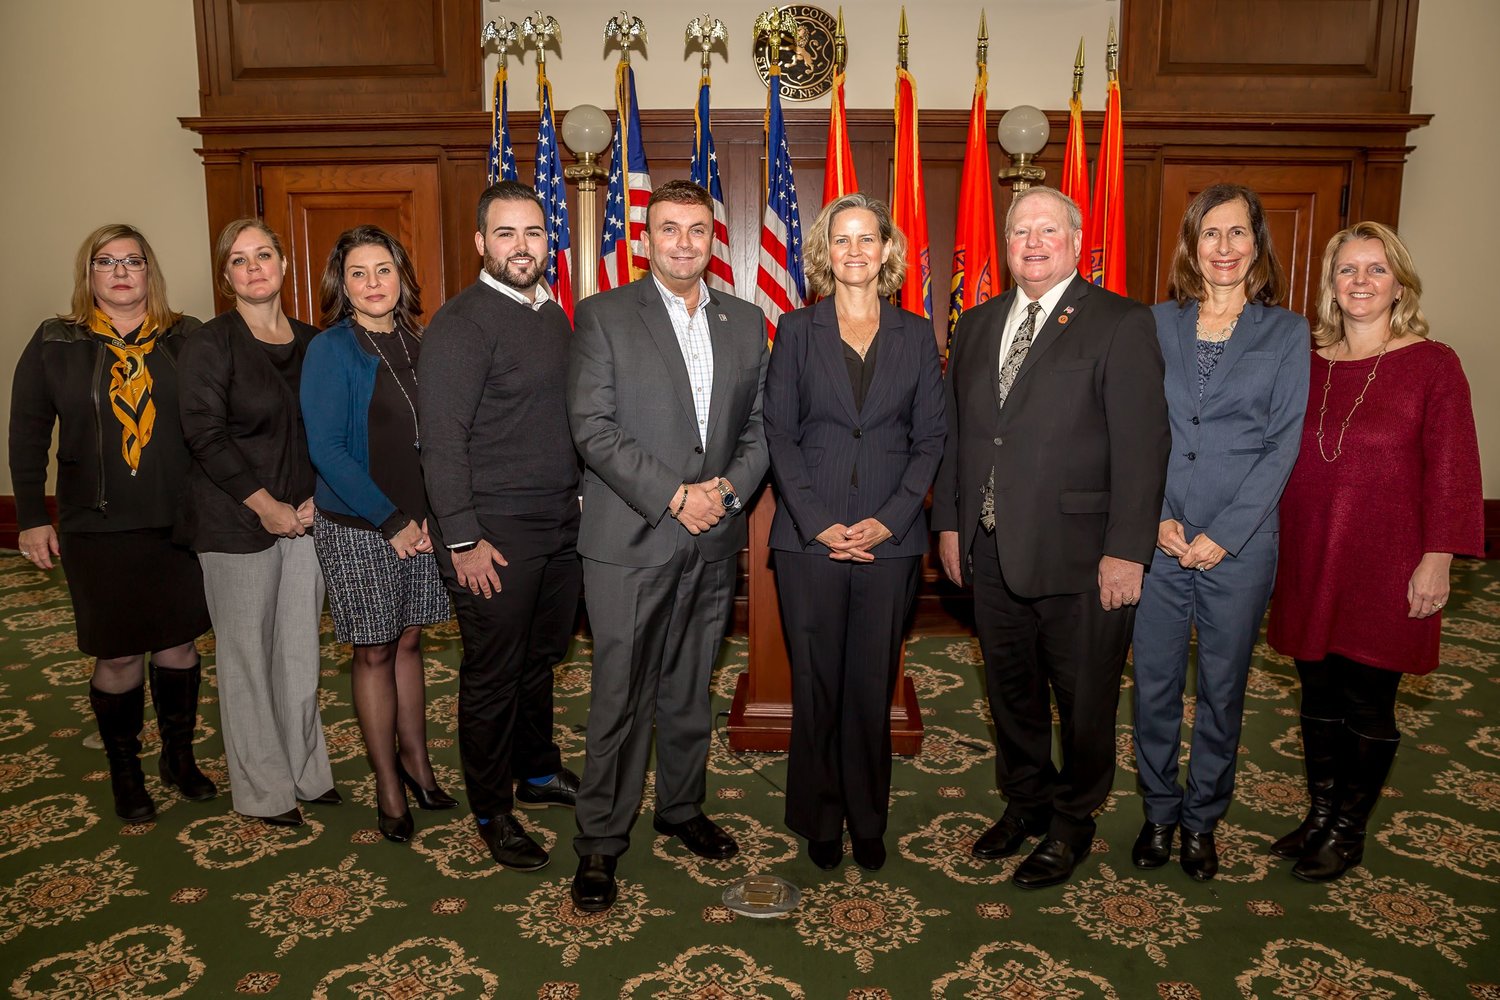 Surrounded by Nassau County legislators and officials, former County Executive Laura Curran, fourth from right, announced her formation of the Nassau County Advisory Committee for Gender Inclusivity on Dec. 30, 2021.